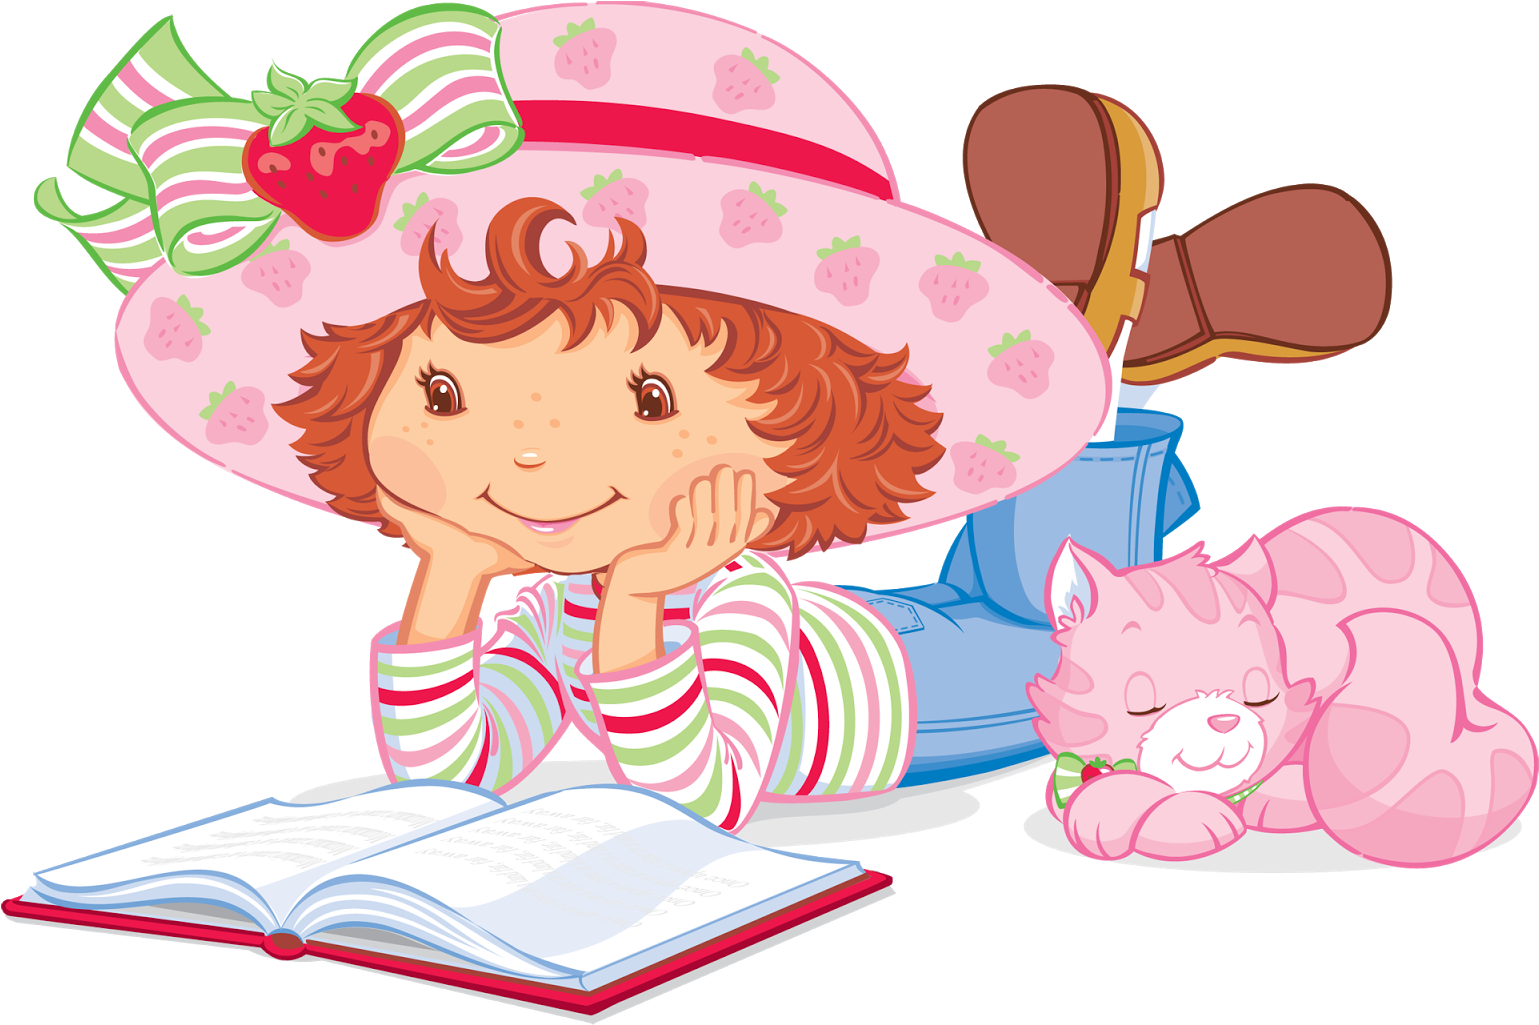 Png Files Cartoon Characters On A Transparent Background - Strawberry Shortcake: Life Is Good (1600x1120)